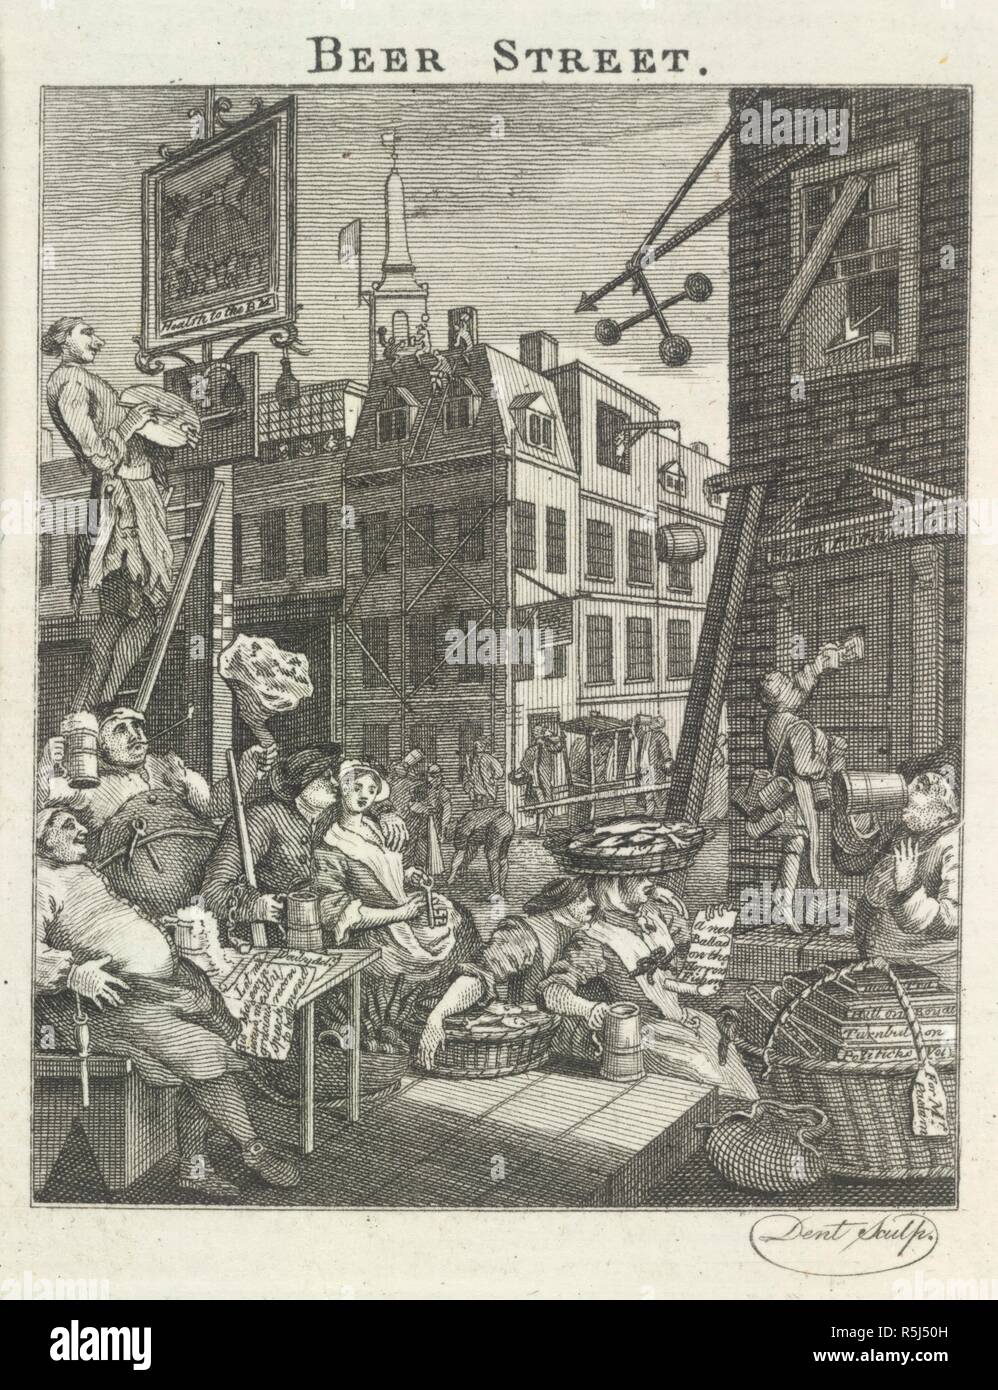 Beer Street. Hogarth Moralized. Being a complete edition of Hog. S. Hooper; Mrs. Hogarth: London, 1768. People drinking outside a public house in London.  Image taken from Hogarth Moralized. Being a complete edition of Hogarth's works containing near fourscore copper-plates with an explanation and a comment on their moral tendency [by John Trusler], etc.  Originally published/produced in S. Hooper; Mrs. Hogarth: London, 1768. . Source: G.2585, 146. Language: English. Author: HOGARTH, WILLIAM. DENT. Stock Photo